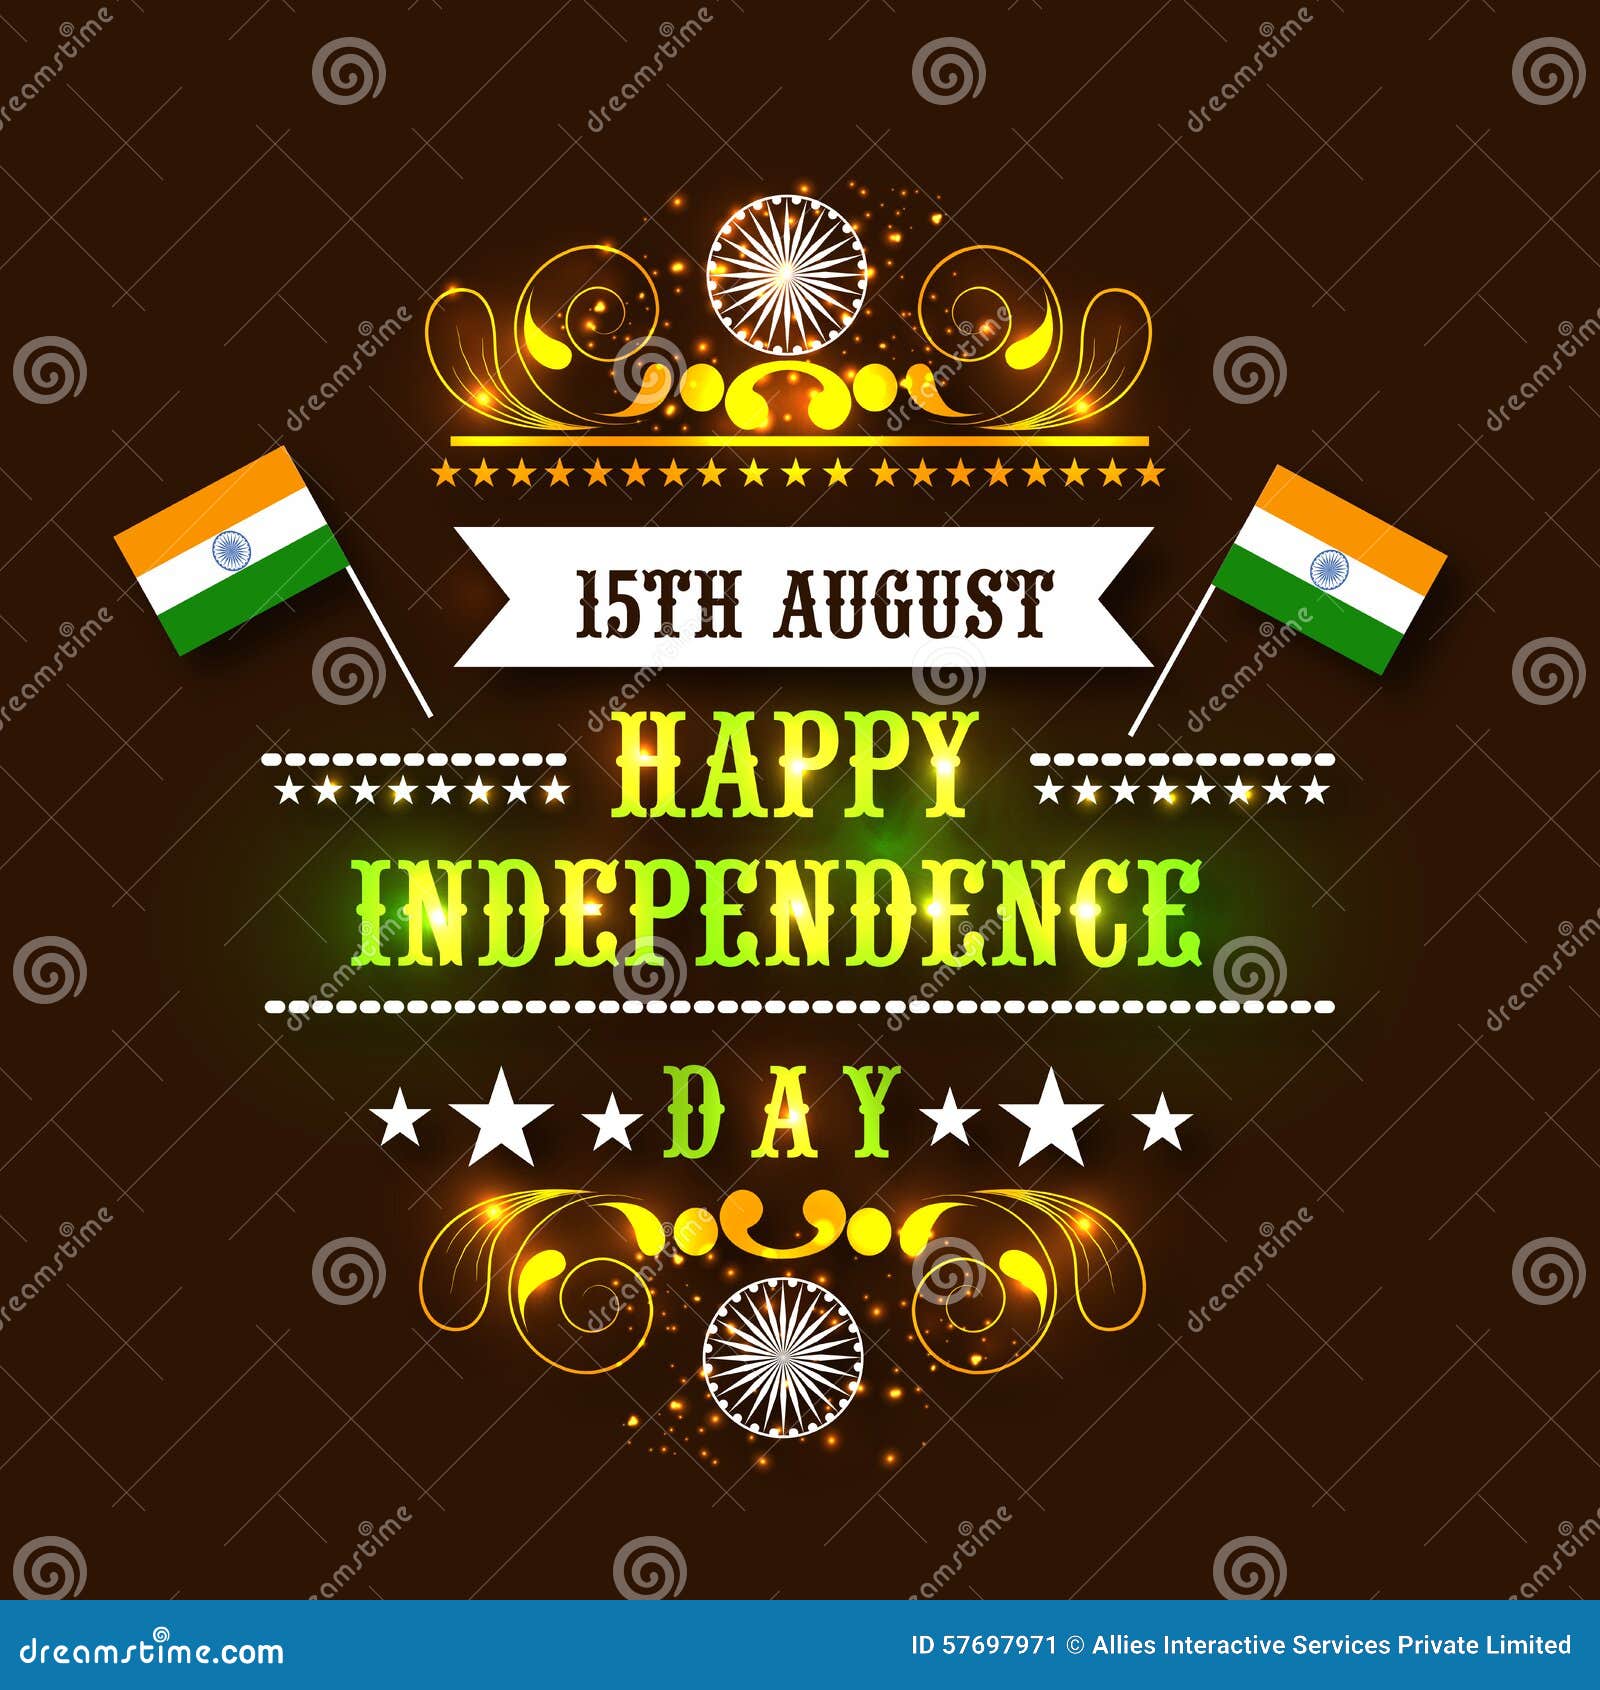 Greeting Card for Indian Independence Day. Stock Illustration ...